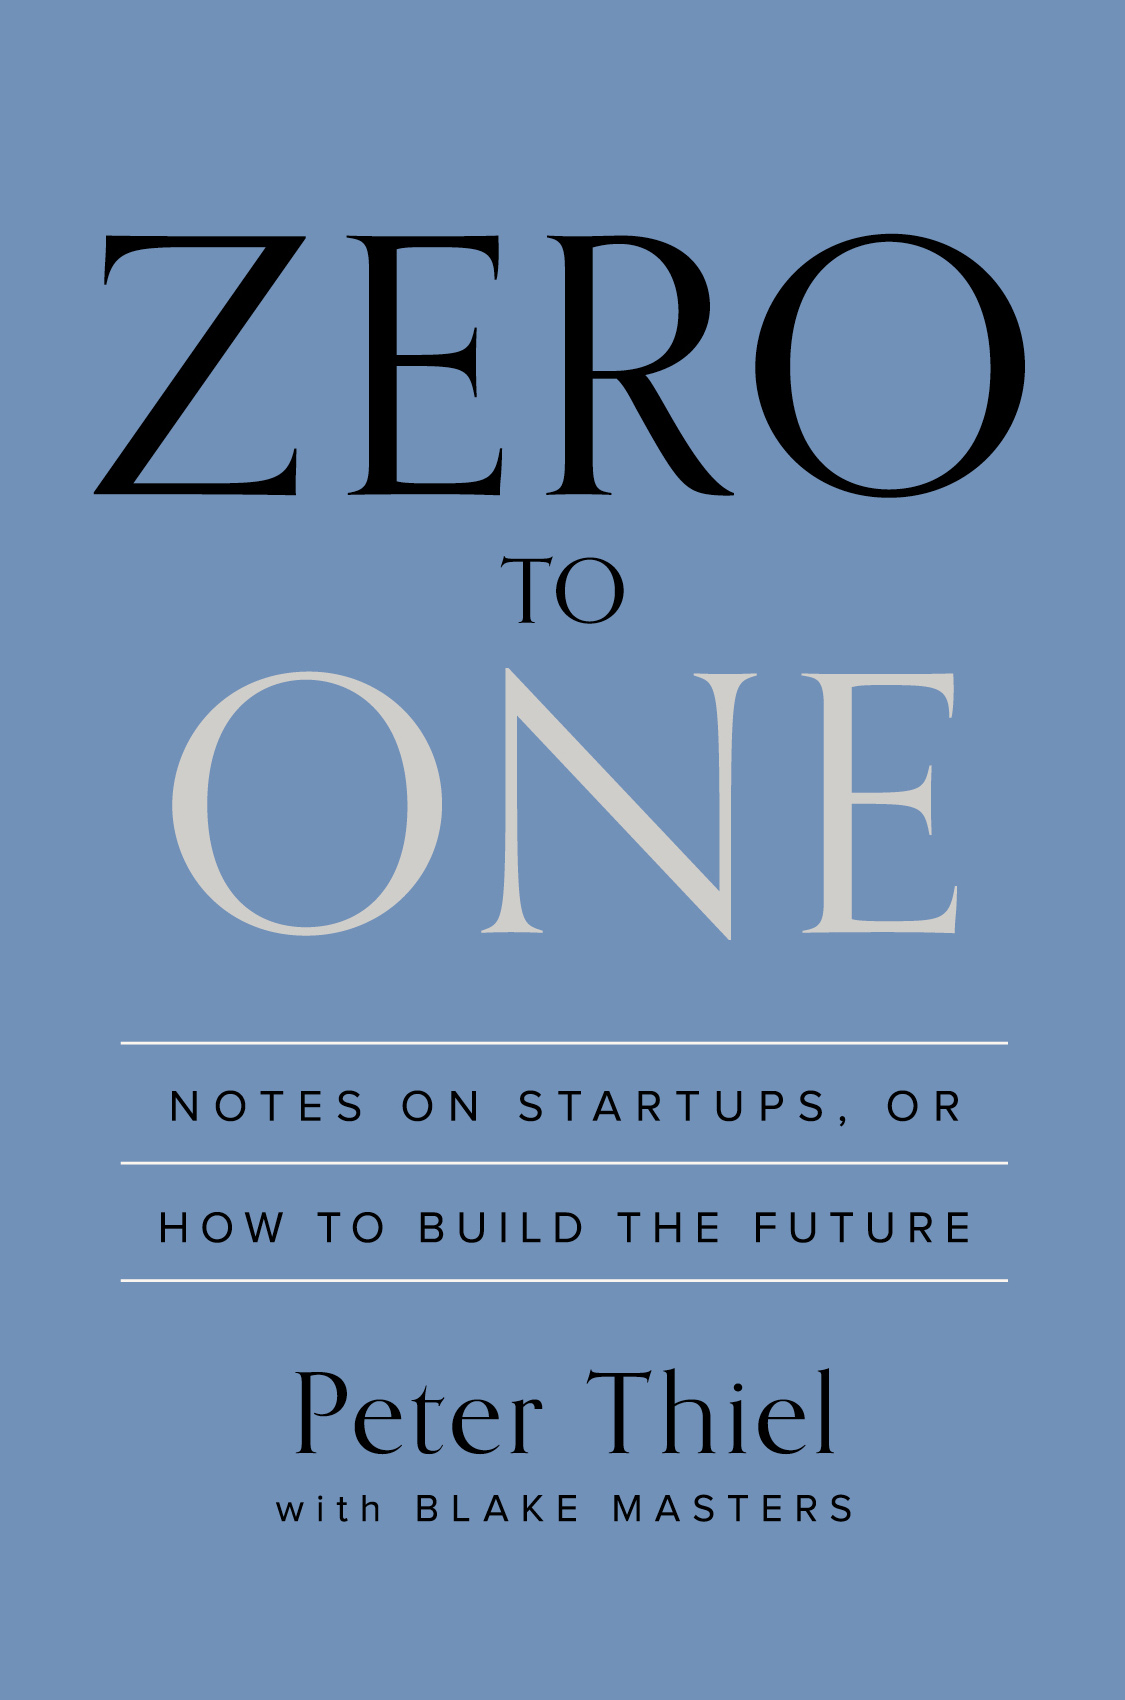 ZERO TO ONE, BY PETER THIEL, turbomind Book Summary by Miguel De La Fuente, https://www.turbomind.com/